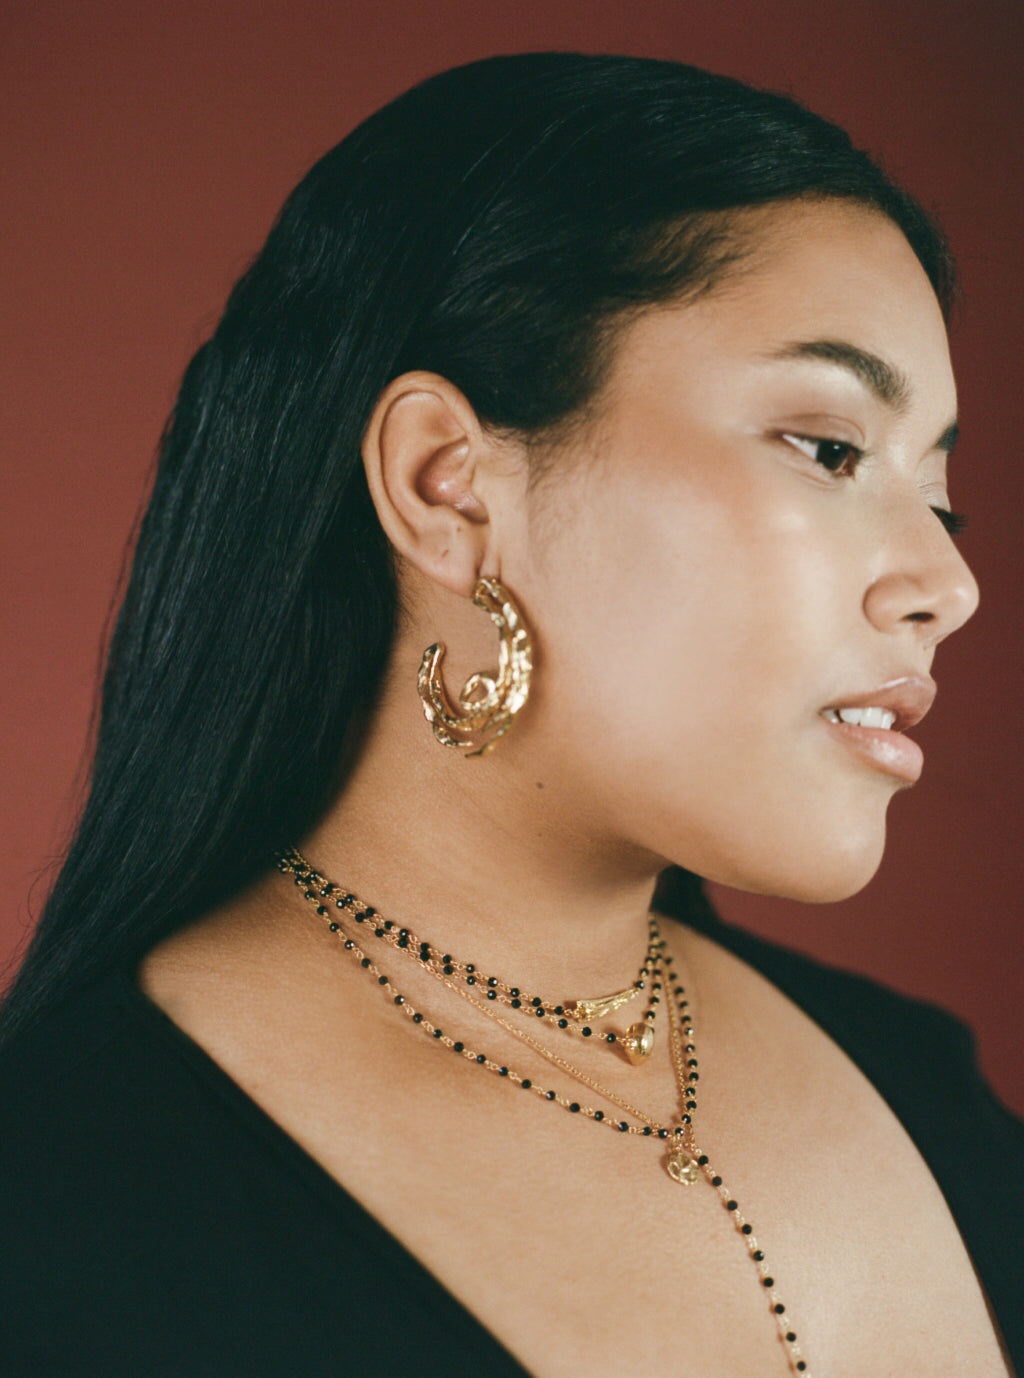 Model wearing large gold hoops and black beaded chain necklaces